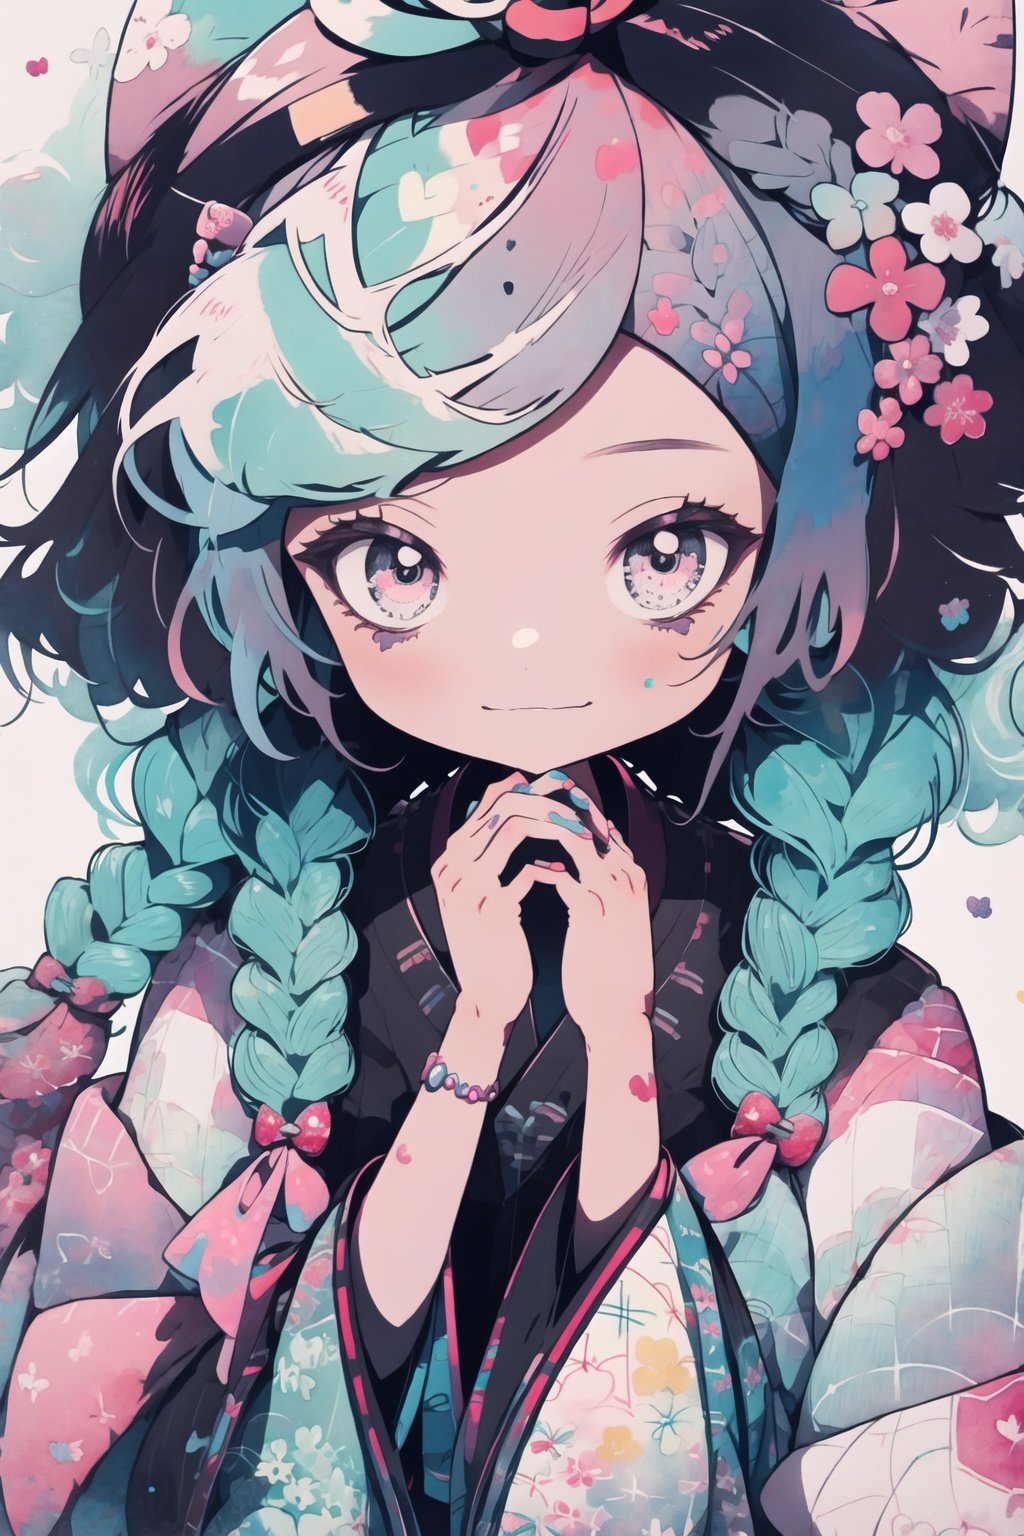 style of Jeremiah Ketner, from below, close up, 1girl, hands up, long braids, asymmetrical bob, kimono on, painted nails, serious, sweet theme, candy, sign, tiny cute follower, candyshop, ultradetailed background, intricate details, pastel color, poster, Illustration, Character Design, Watercolor, Ink, thematic background, japan, ambient enviroment, epic, candystyle